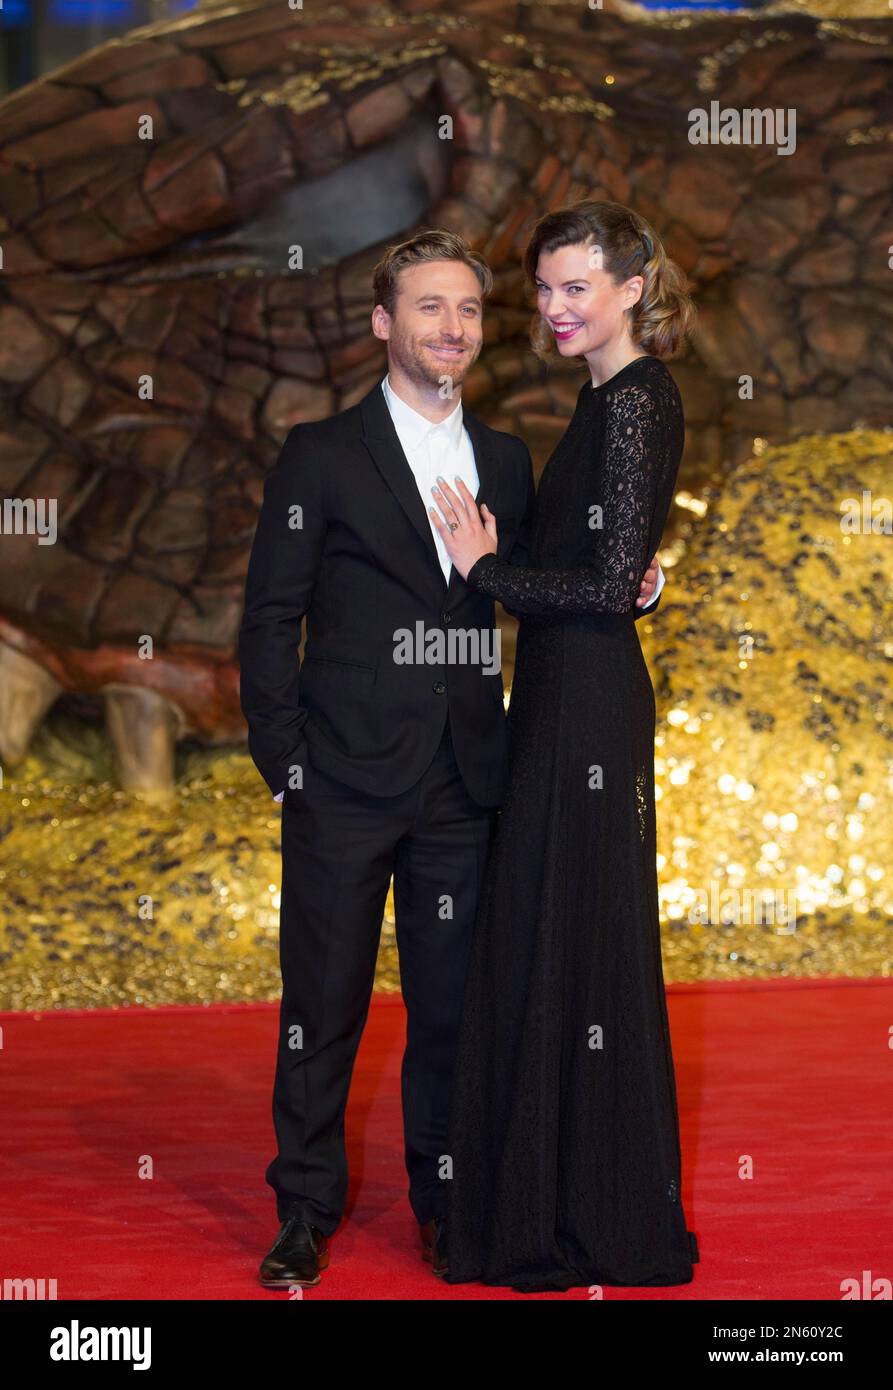 Dean O'Gorman, left, and his girlfriend Sarah Wilson arrive for the  European Premiere of the movie "The Hobbit: The Desolation of Smaug" in  Berlin, Germany, Monday, Dec. 9, 2013. (AP Photo/Gero Breloer